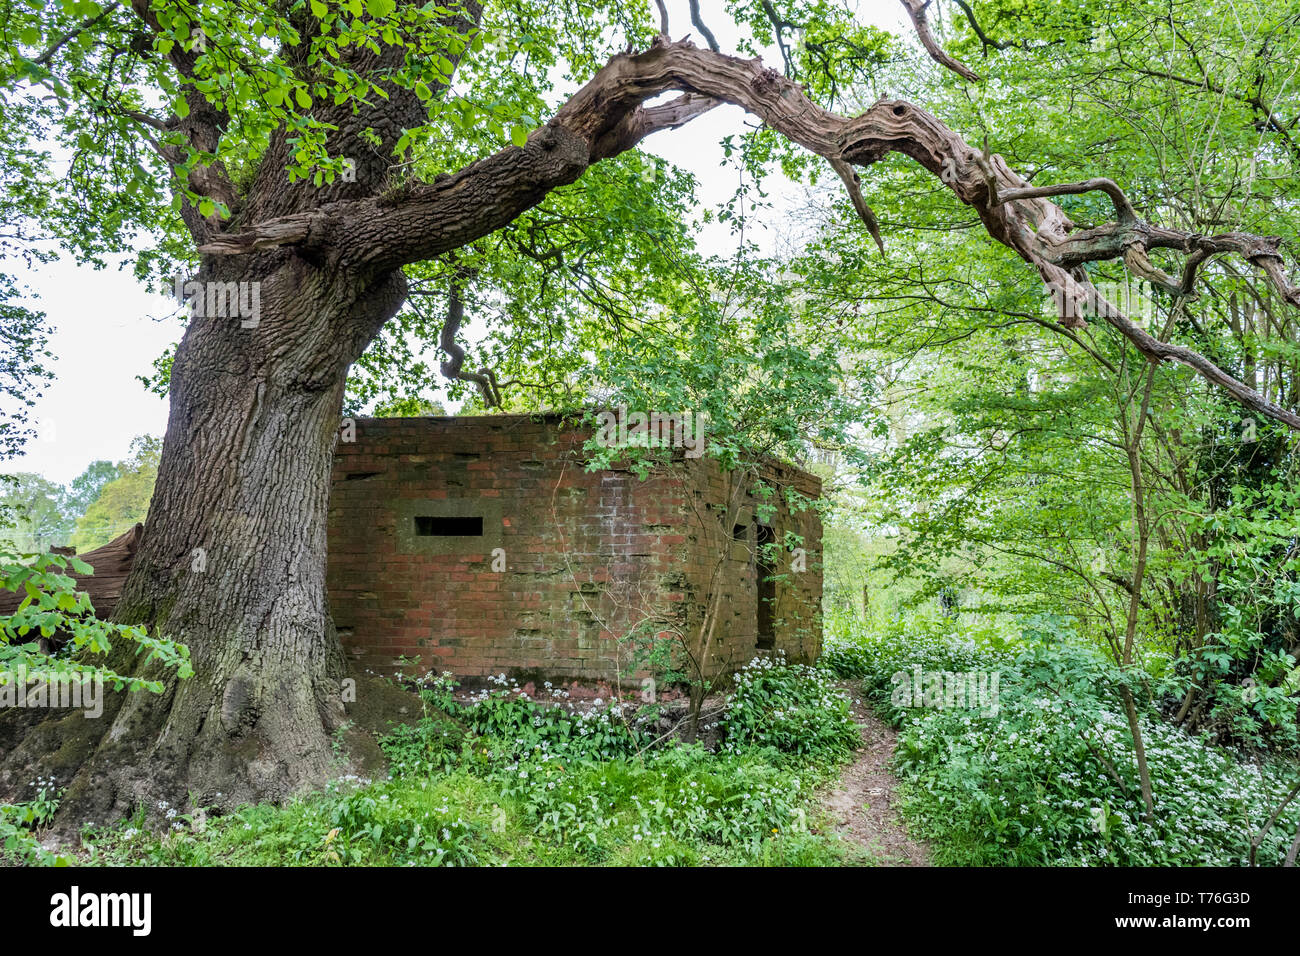 Second World War Type 24 Pillbox with brick construction and concrete loopholes being overgrown underneath a crooked tree branch in a woodland setting Stock Photo